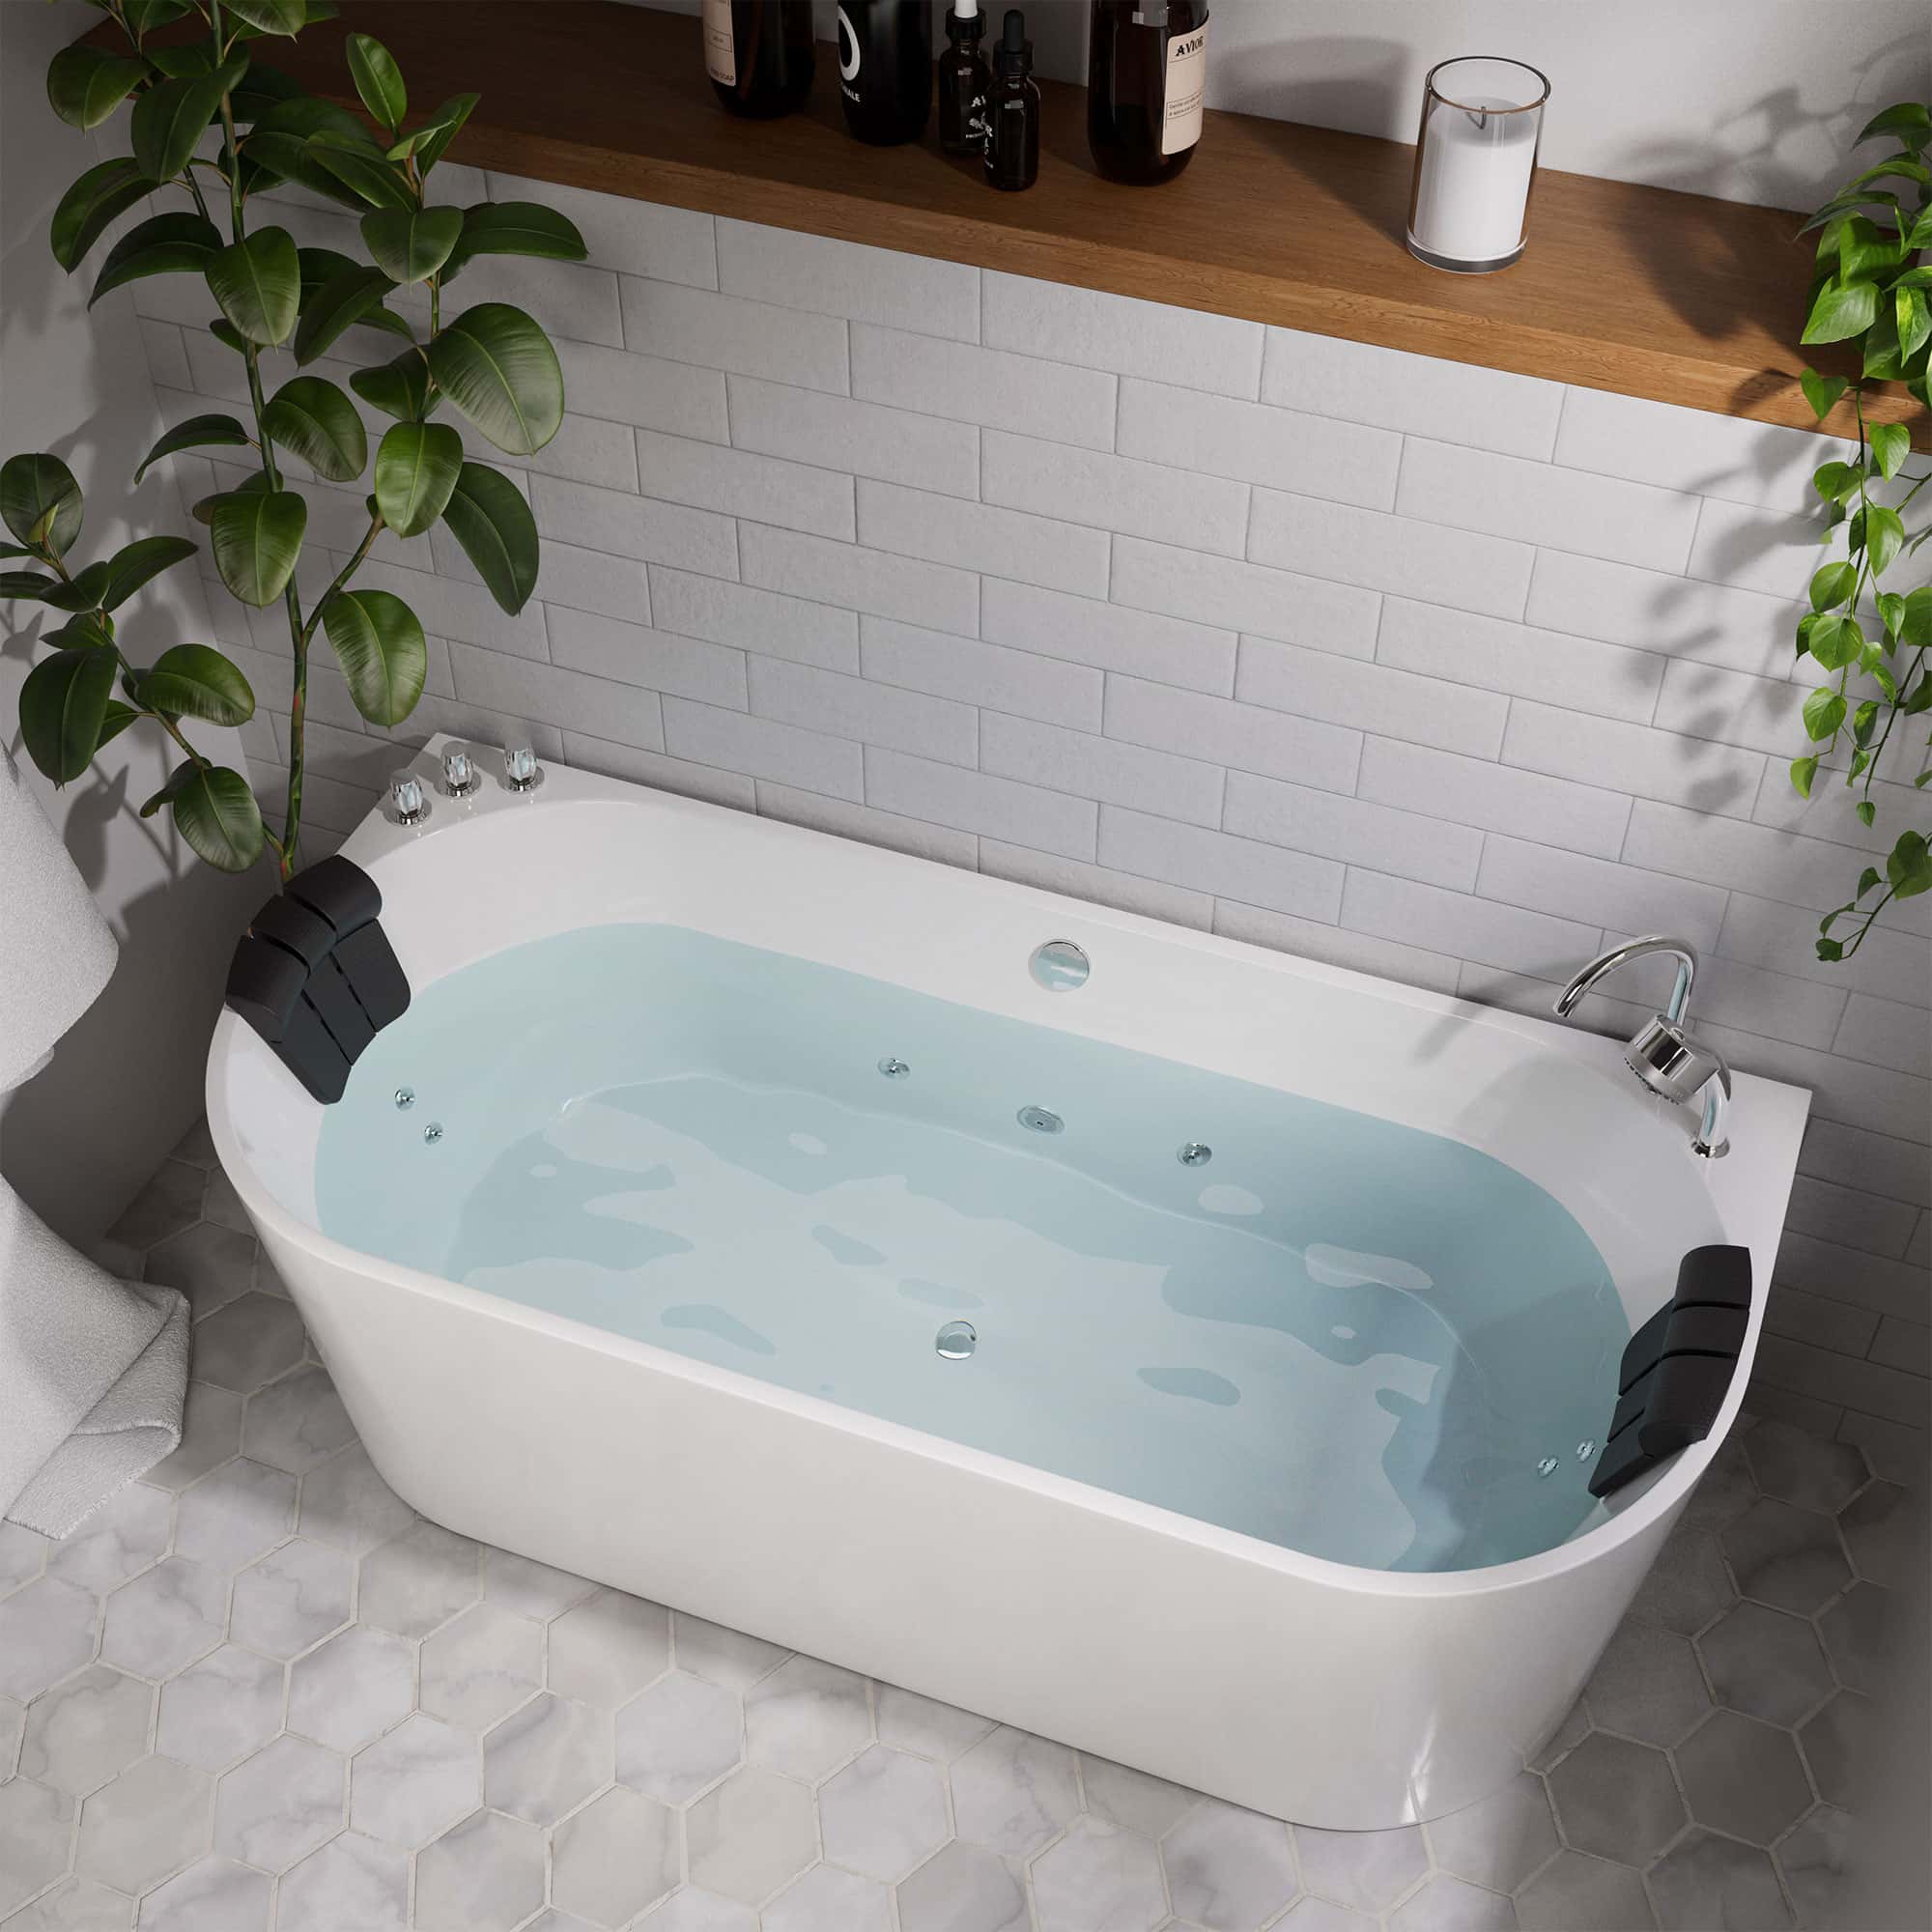 Empava-59AIS06 whirlpool acrylic alcove oval double-ended bathtub with water